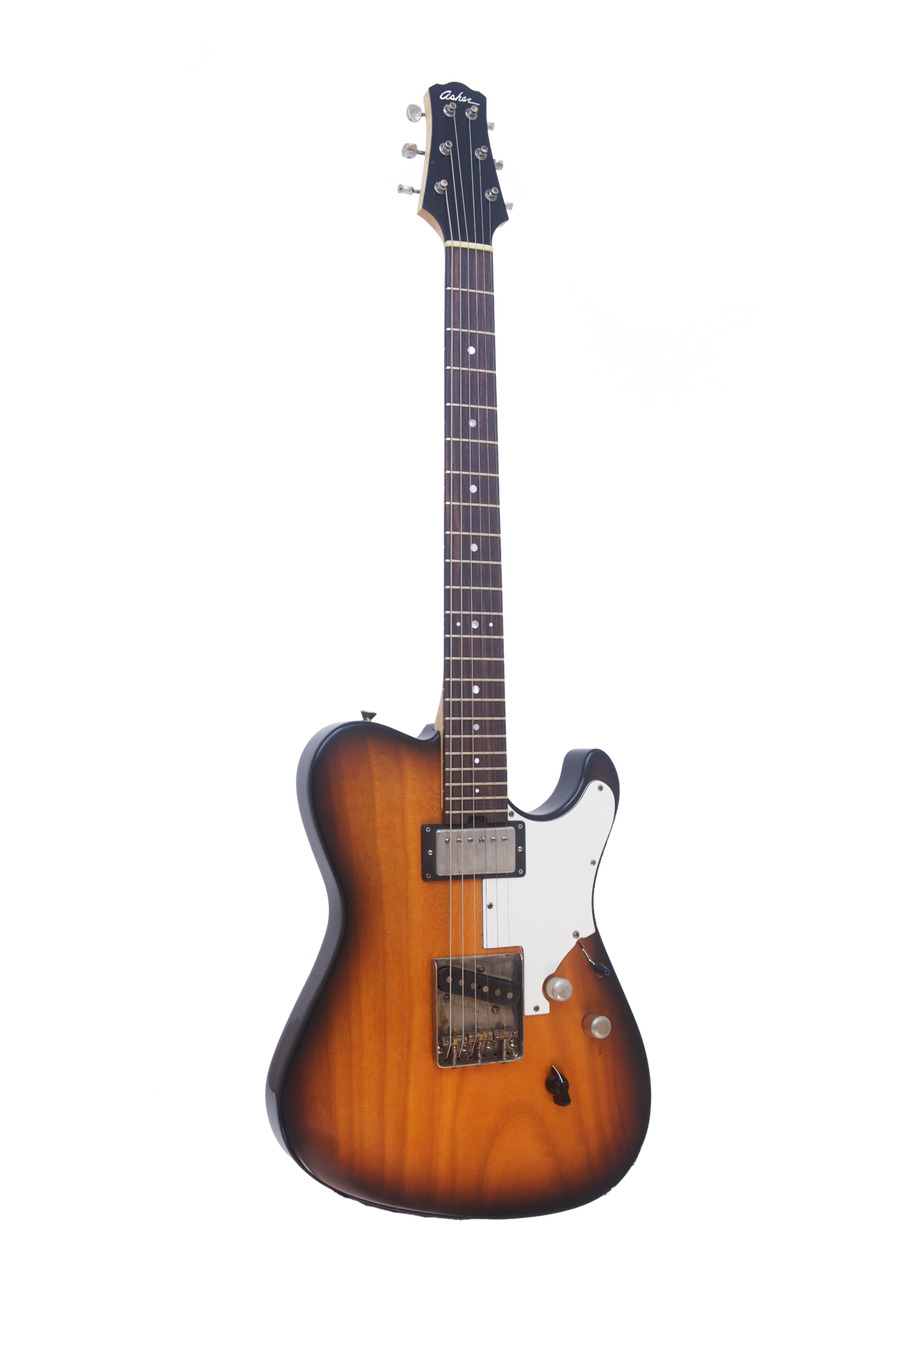 SOLD Asher HT Deluxe #863 in a Light Relic Two-Tone Nitro Burst